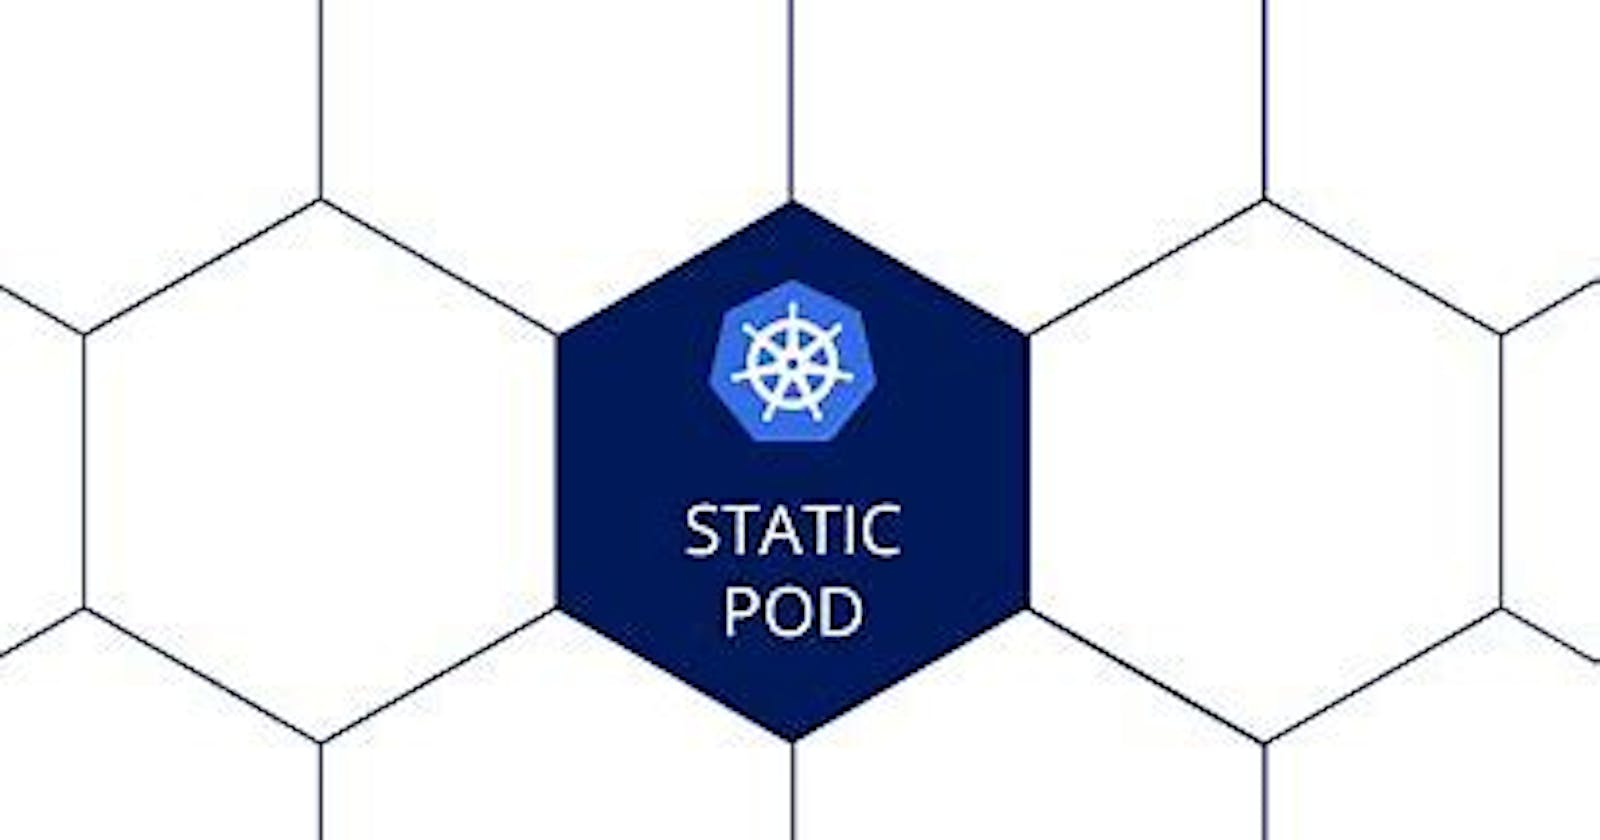 Static Pods in Kubernetes